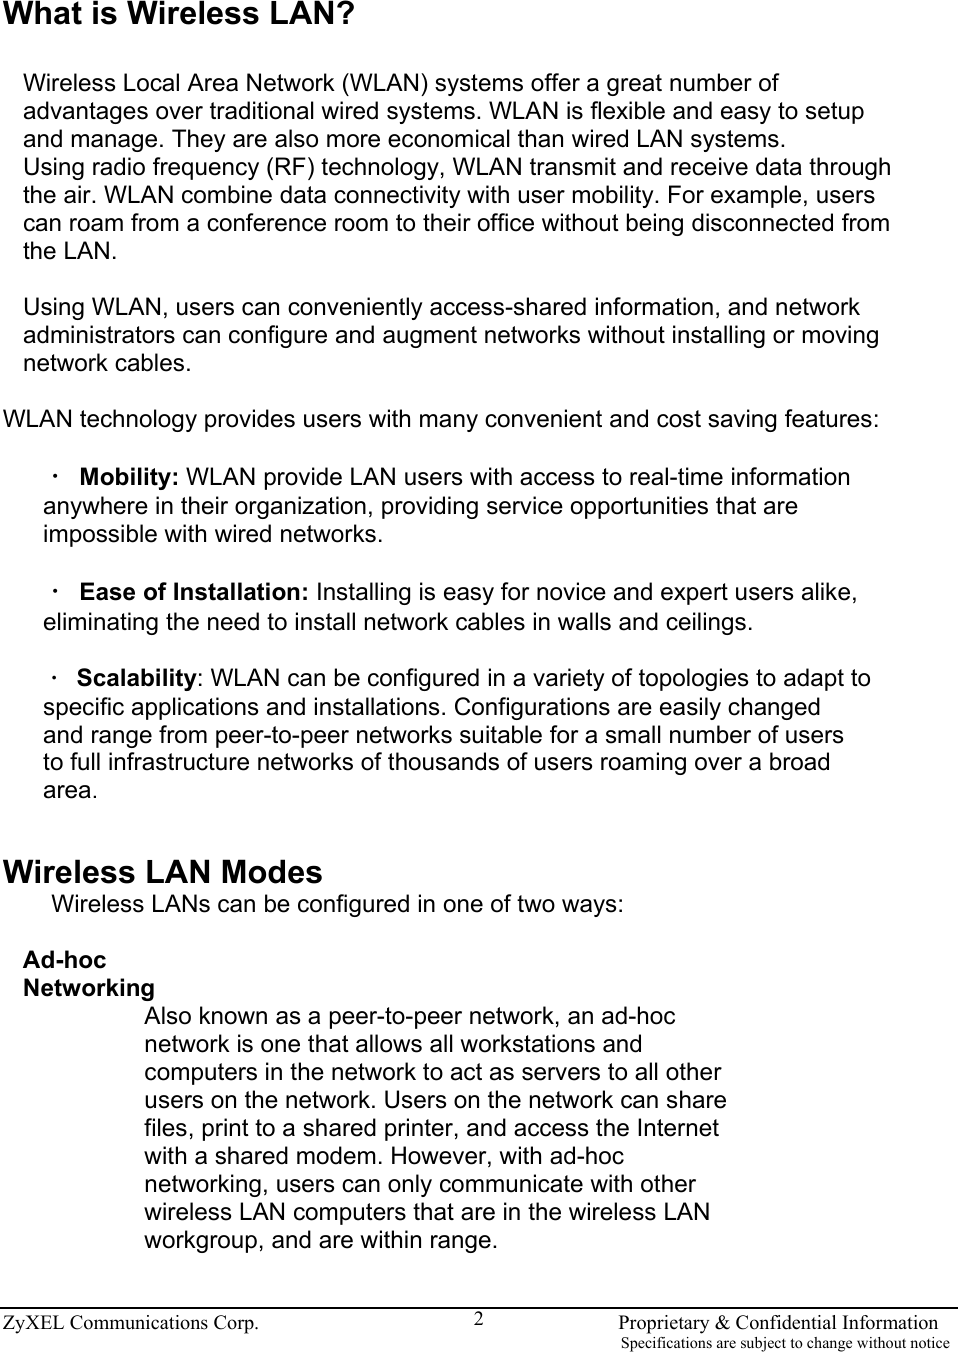  ZyXEL Communications Corp.                                                                       Proprietary &amp; Confidential Information                                                                                                                           Specifications are subject to change without notice 2 What is Wireless LAN?  Wireless Local Area Network (WLAN) systems offer a great number of advantages over traditional wired systems. WLAN is flexible and easy to setup and manage. They are also more economical than wired LAN systems. Using radio frequency (RF) technology, WLAN transmit and receive data through the air. WLAN combine data connectivity with user mobility. For example, users can roam from a conference room to their office without being disconnected from the LAN.  Using WLAN, users can conveniently access-shared information, and network administrators can configure and augment networks without installing or moving network cables.  WLAN technology provides users with many convenient and cost saving features:  ‧ Mobility: WLAN provide LAN users with access to real-time information anywhere in their organization, providing service opportunities that are impossible with wired networks.  ‧ Ease of Installation: Installing is easy for novice and expert users alike, eliminating the need to install network cables in walls and ceilings.  ‧ Scalability: WLAN can be configured in a variety of topologies to adapt to specific applications and installations. Configurations are easily changed and range from peer-to-peer networks suitable for a small number of users to full infrastructure networks of thousands of users roaming over a broad area.   Wireless LAN Modes Wireless LANs can be configured in one of two ways:  Ad-hoc Networking Also known as a peer-to-peer network, an ad-hoc network is one that allows all workstations and computers in the network to act as servers to all other users on the network. Users on the network can share files, print to a shared printer, and access the Internet with a shared modem. However, with ad-hoc networking, users can only communicate with other wireless LAN computers that are in the wireless LAN workgroup, and are within range.  